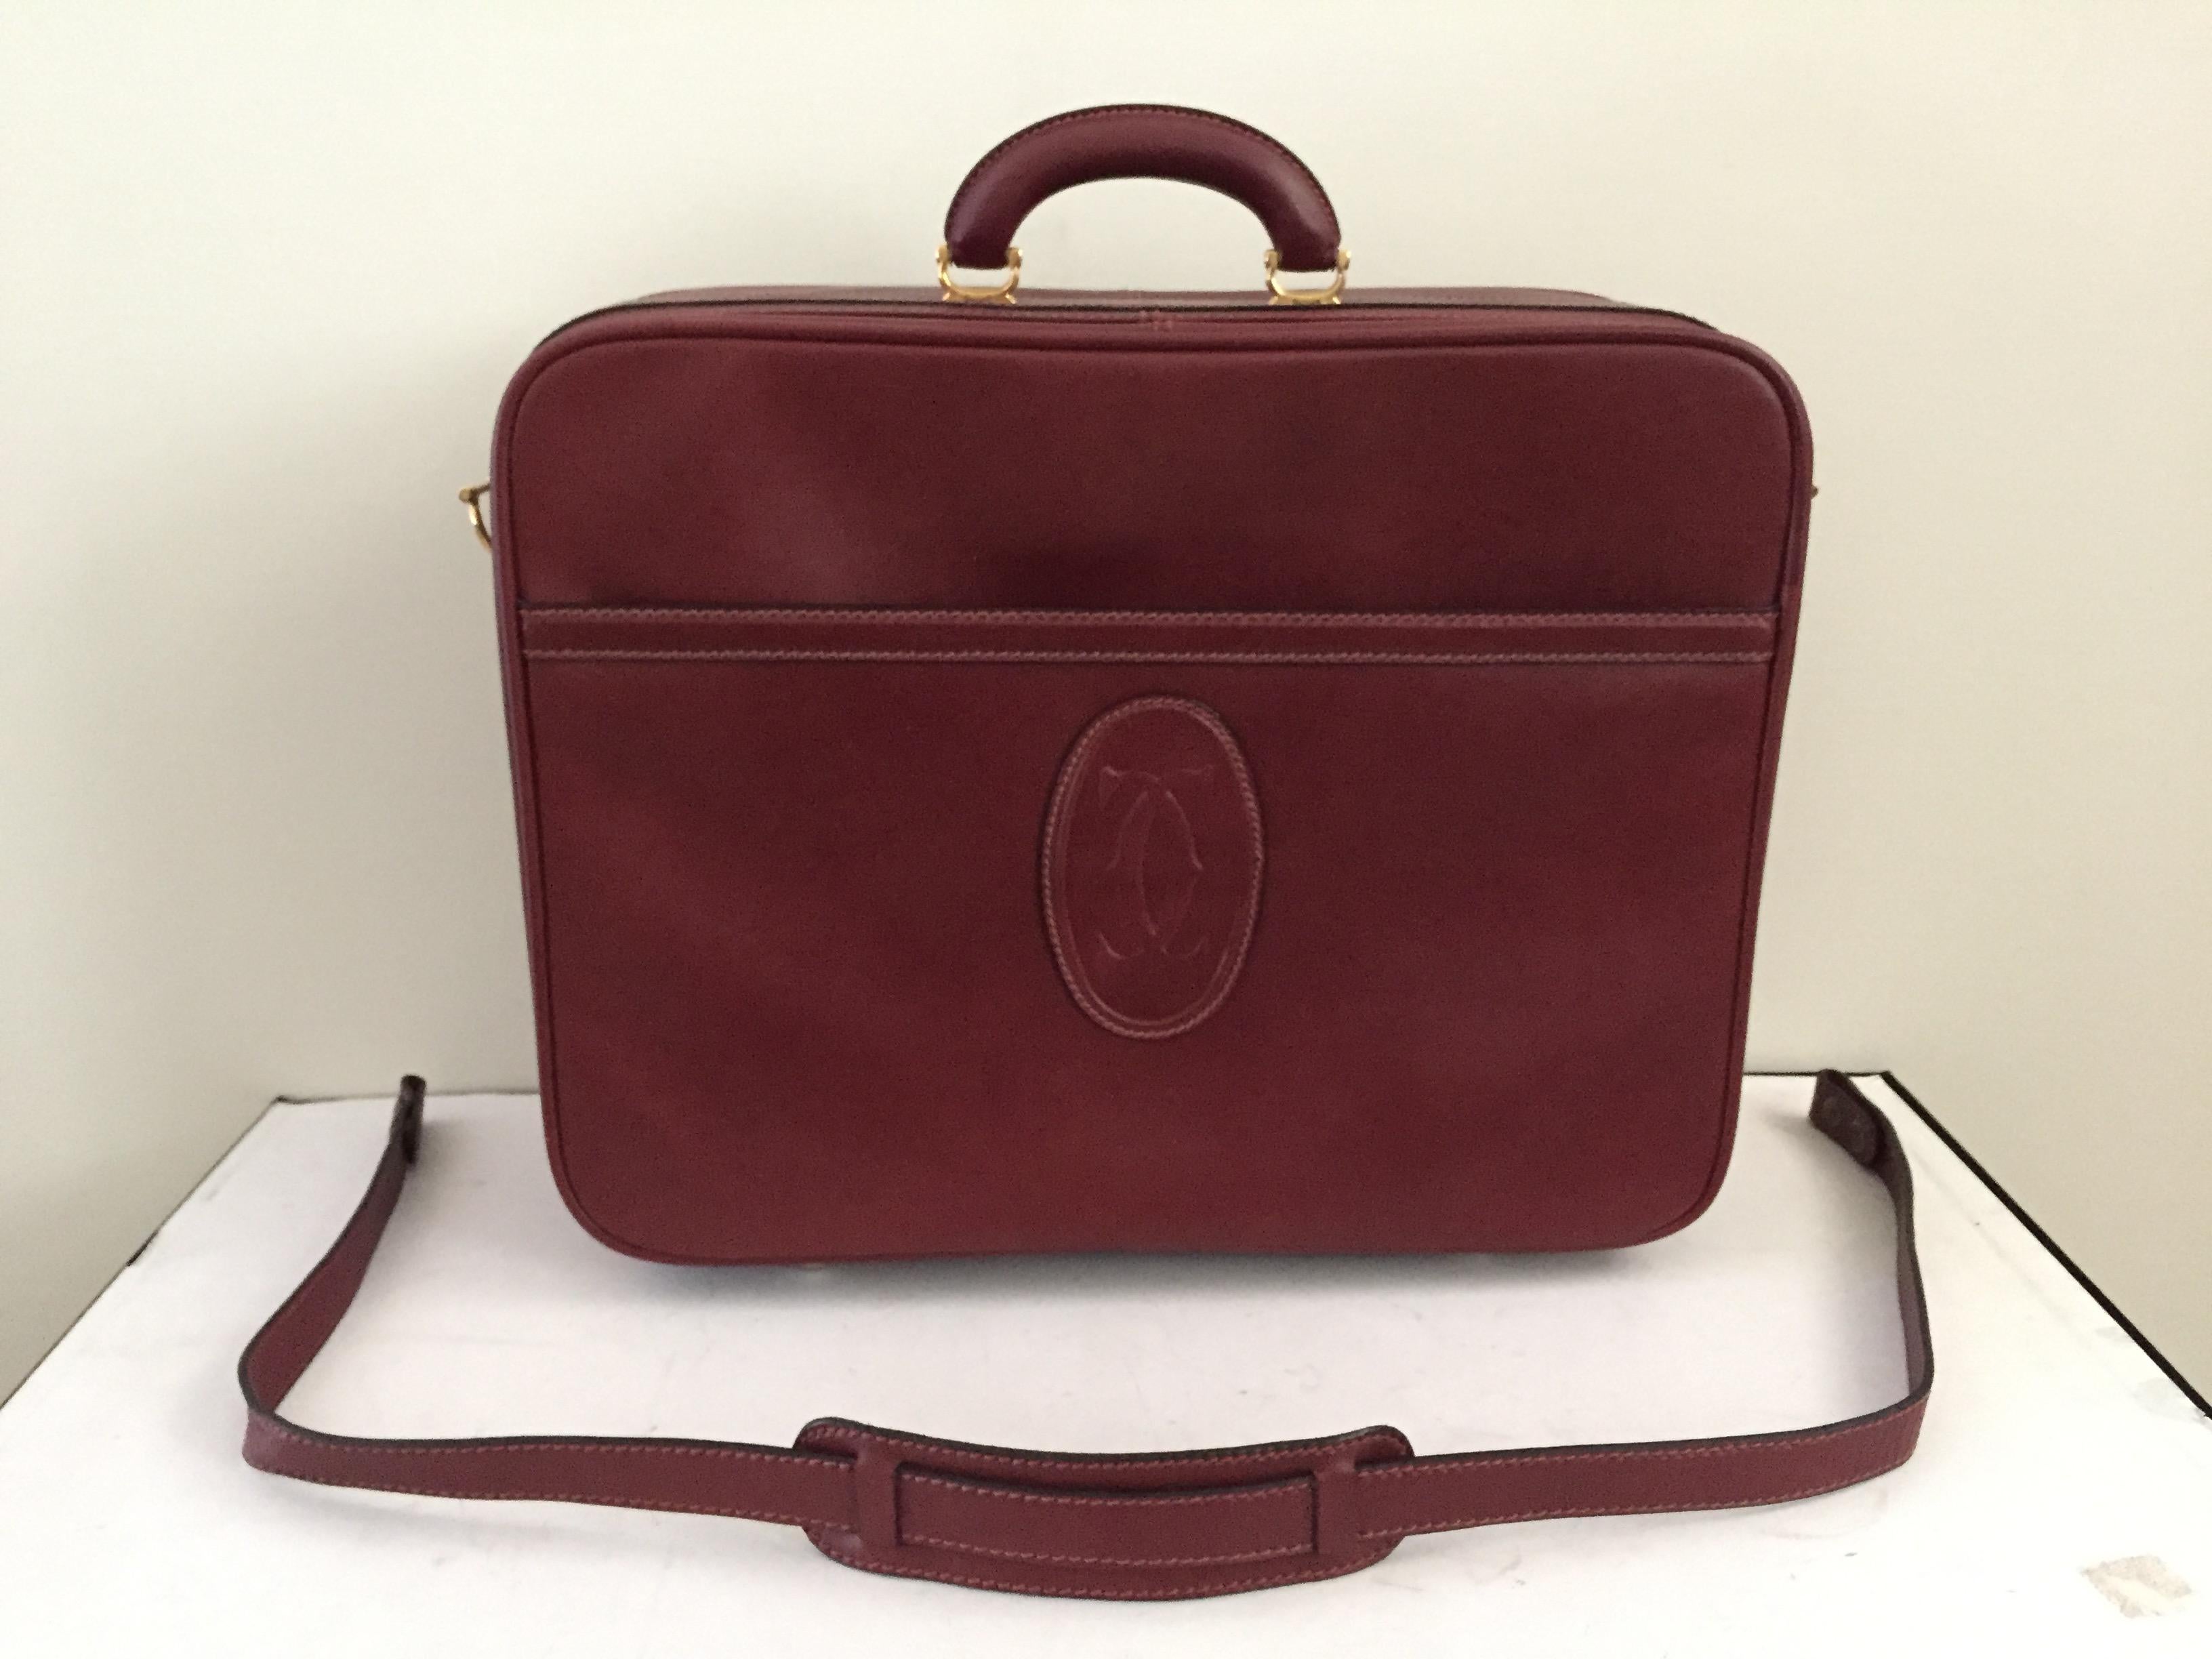 Mid-Century Modern Cartier Les Must de Cartier Burgundy Leather Travel Overnight Suitcase / Luggage